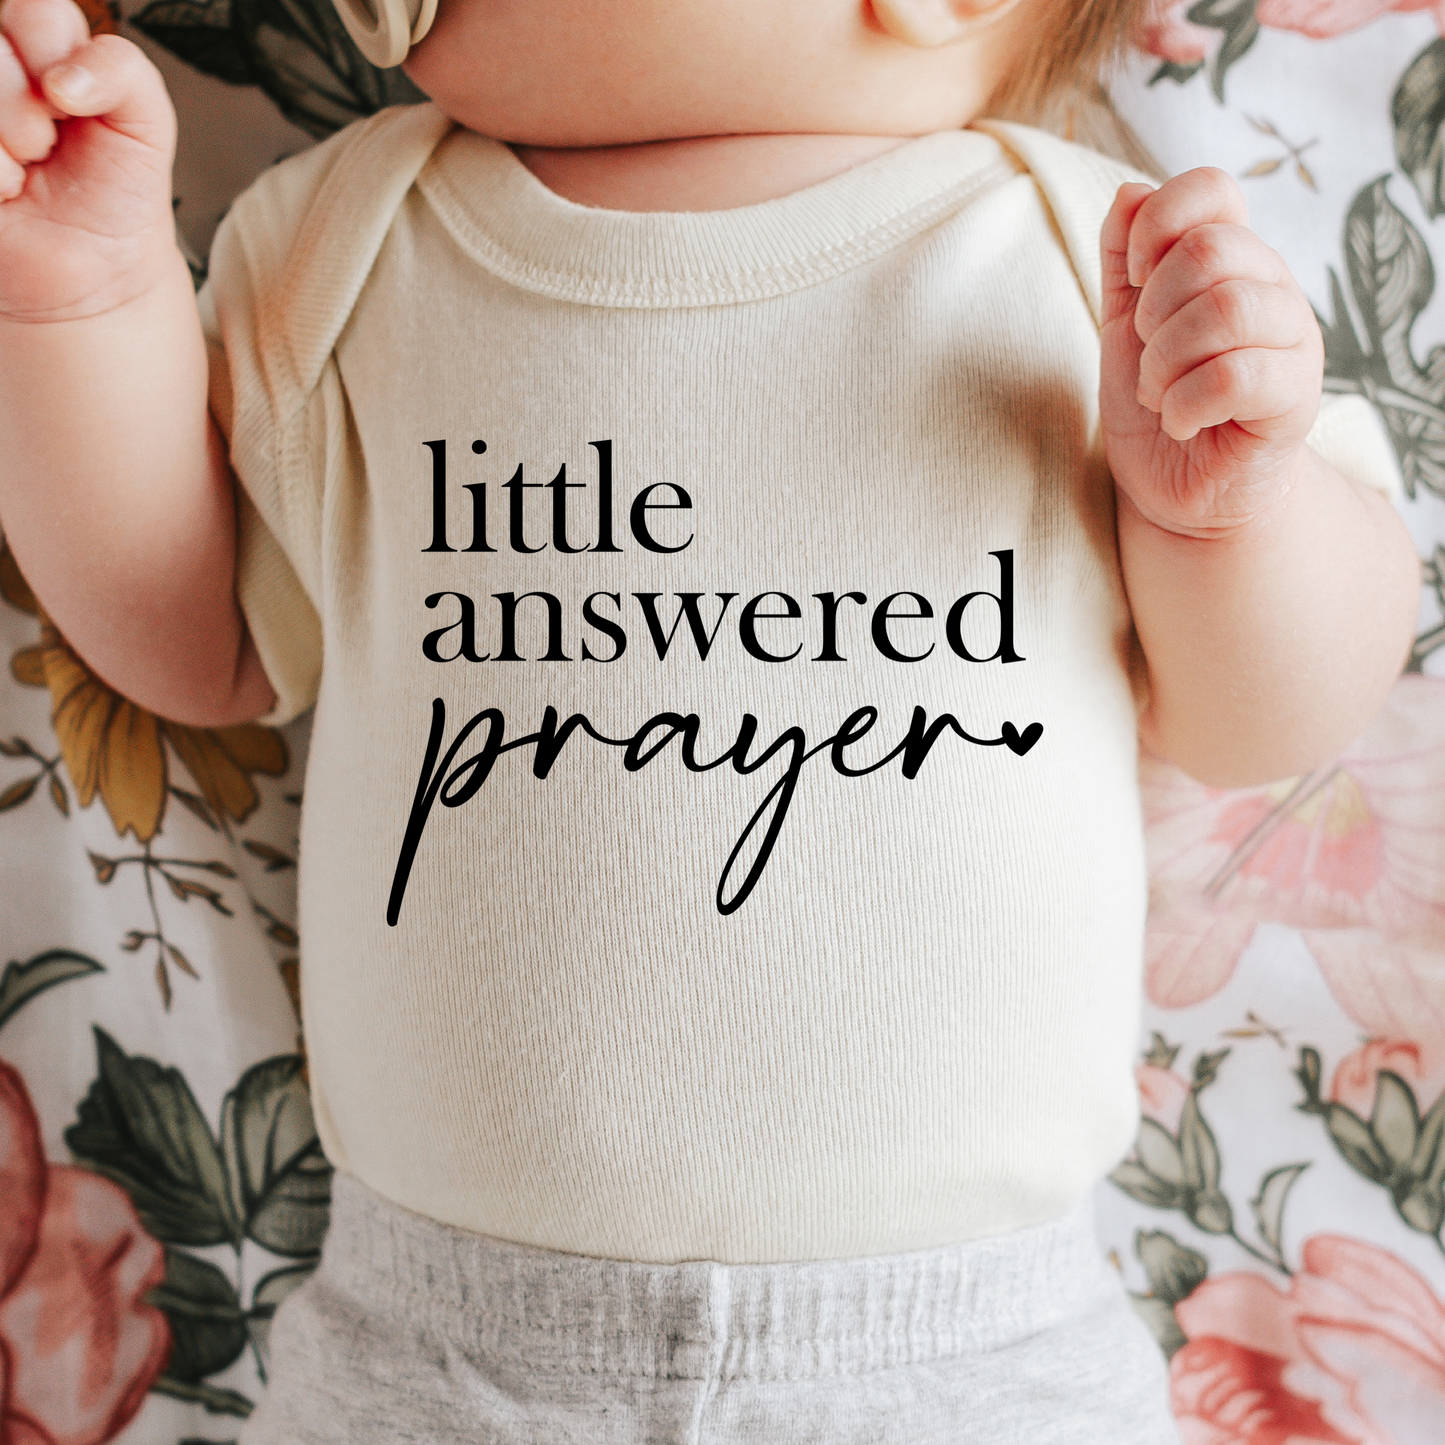 Little Answered prayer Baby Onepiece for Pregnancy Announcement